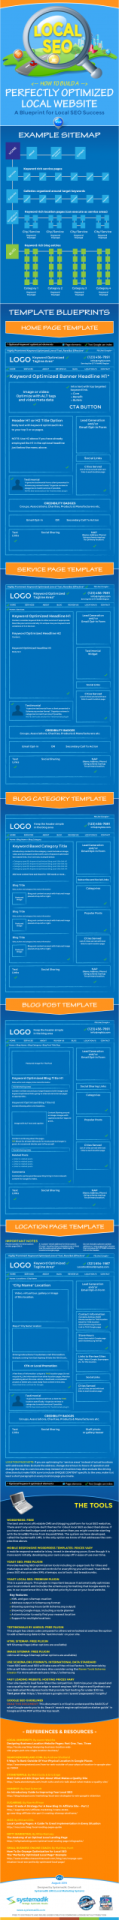 Local-SEO-Template-Blueprint-Infographic3